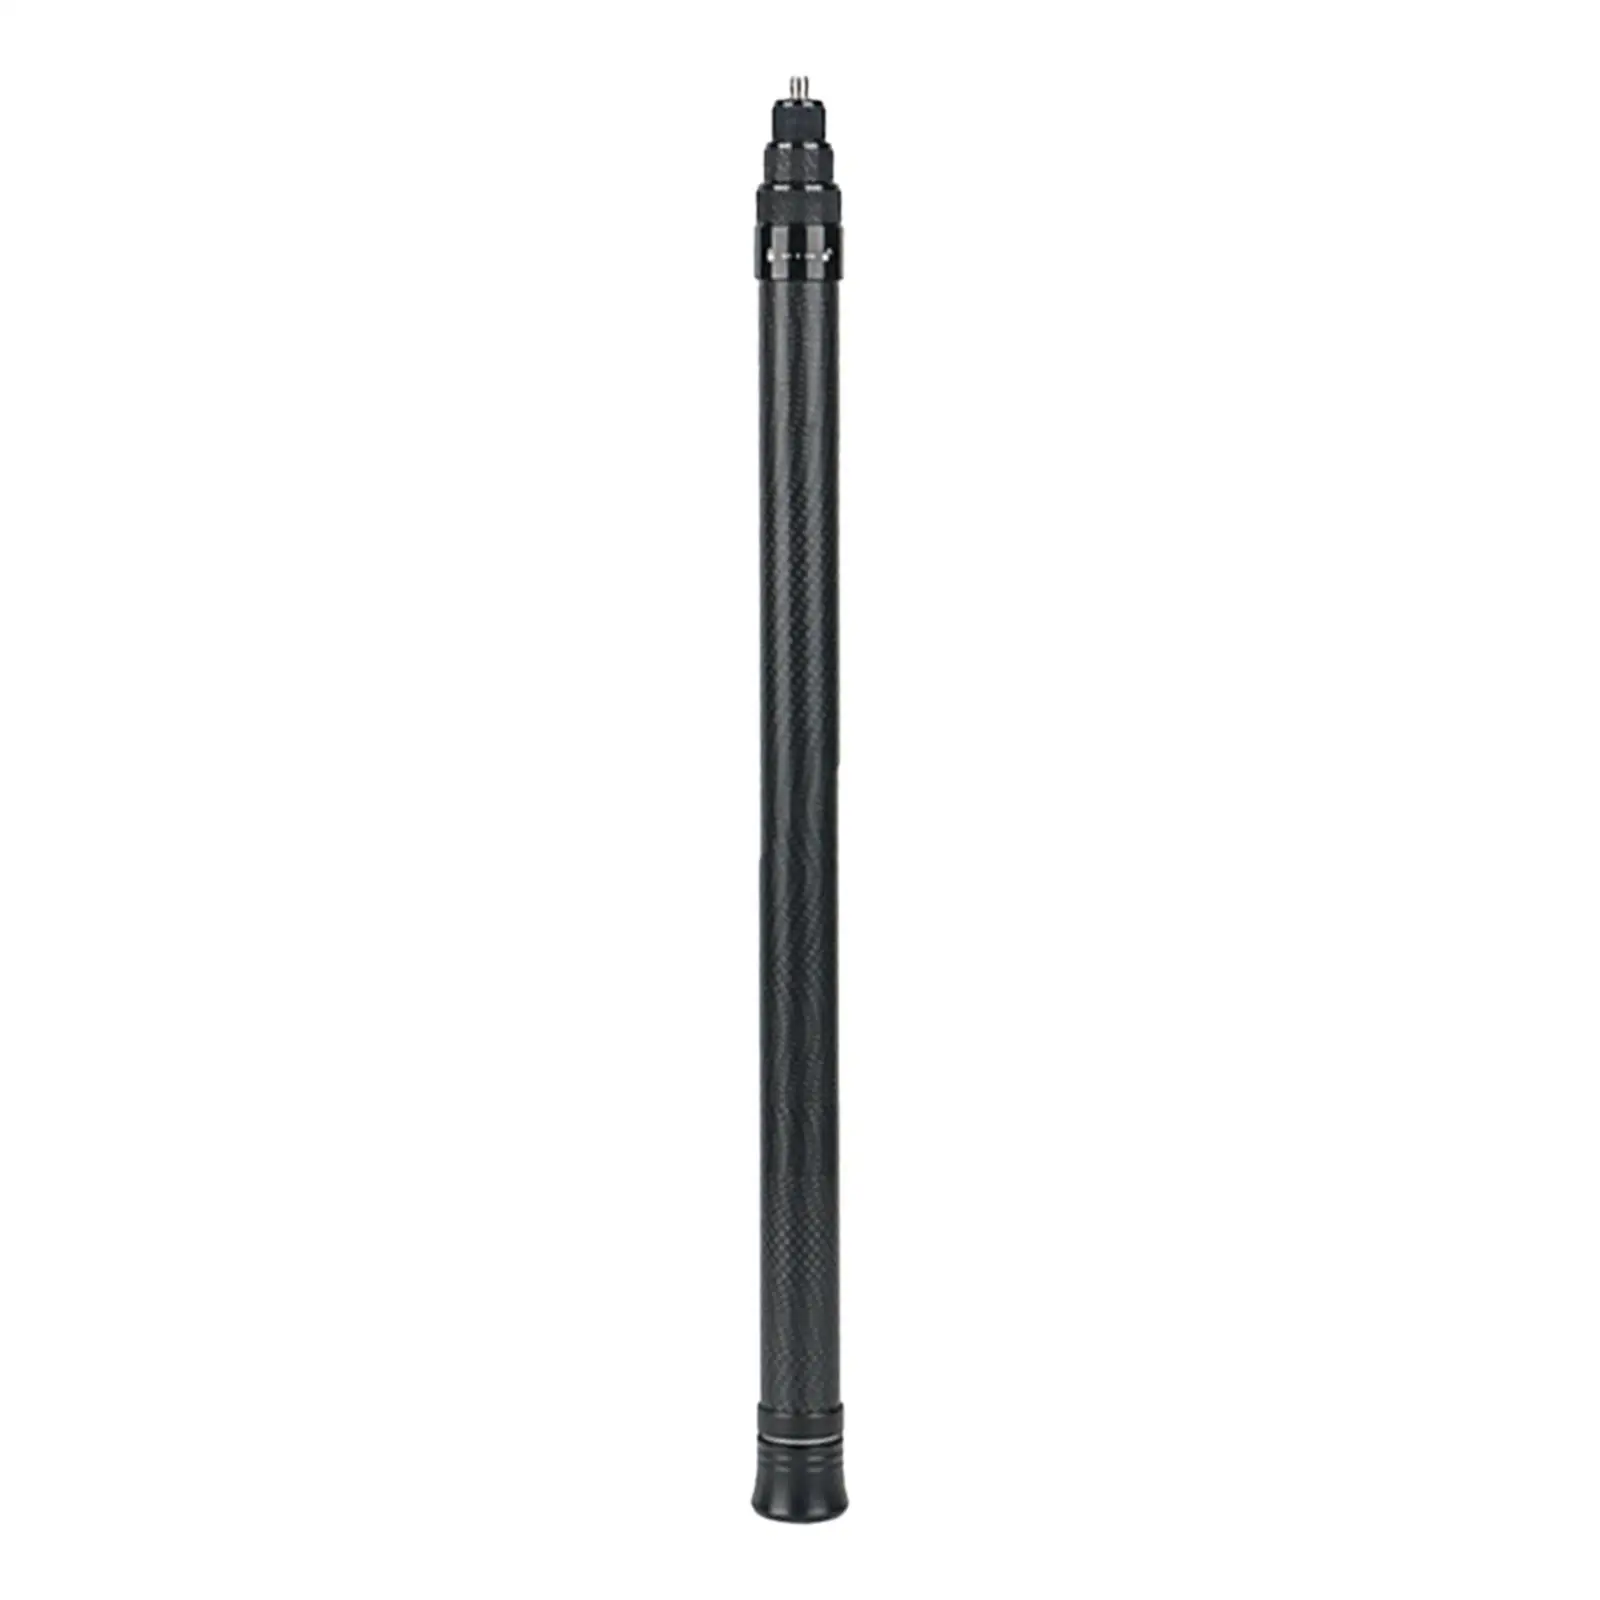 Selfie Stick Pole Strong Load Bearing Accessories Firmly Connected Carbon Fiber Monopod Lengths Extension for Outdoor Activities